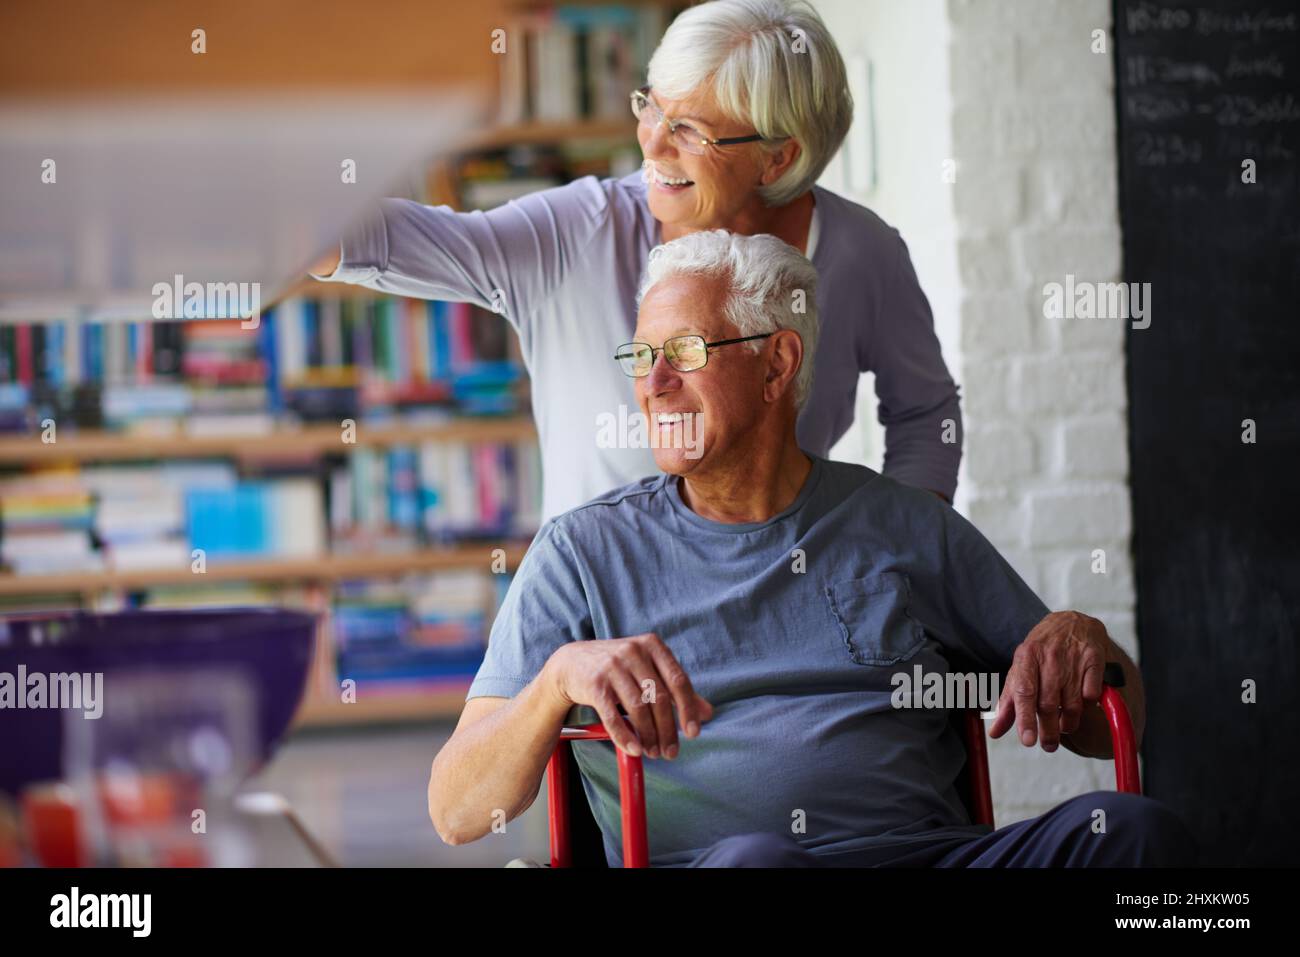 Nothing gets us down. Shot of a senior woman pushing her husband in a wheelchair at home. Stock Photo